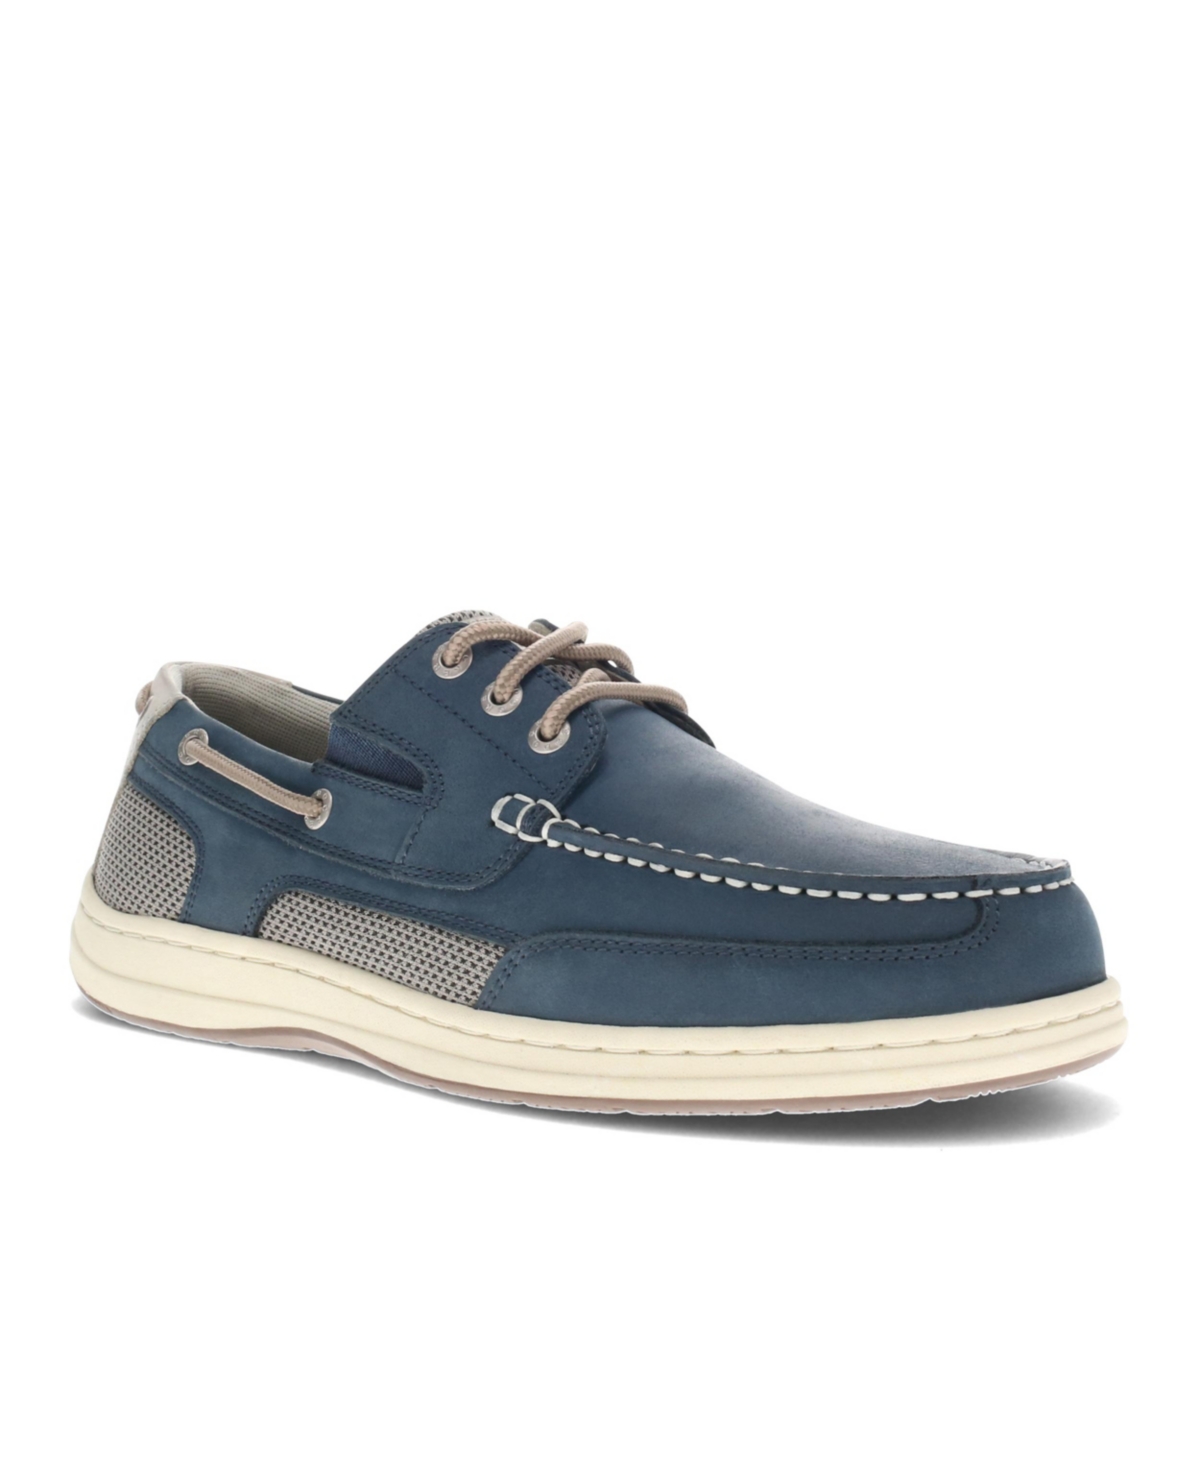 Men's Beacon Leather Casual Boat Shoe with NeverWet - Navy